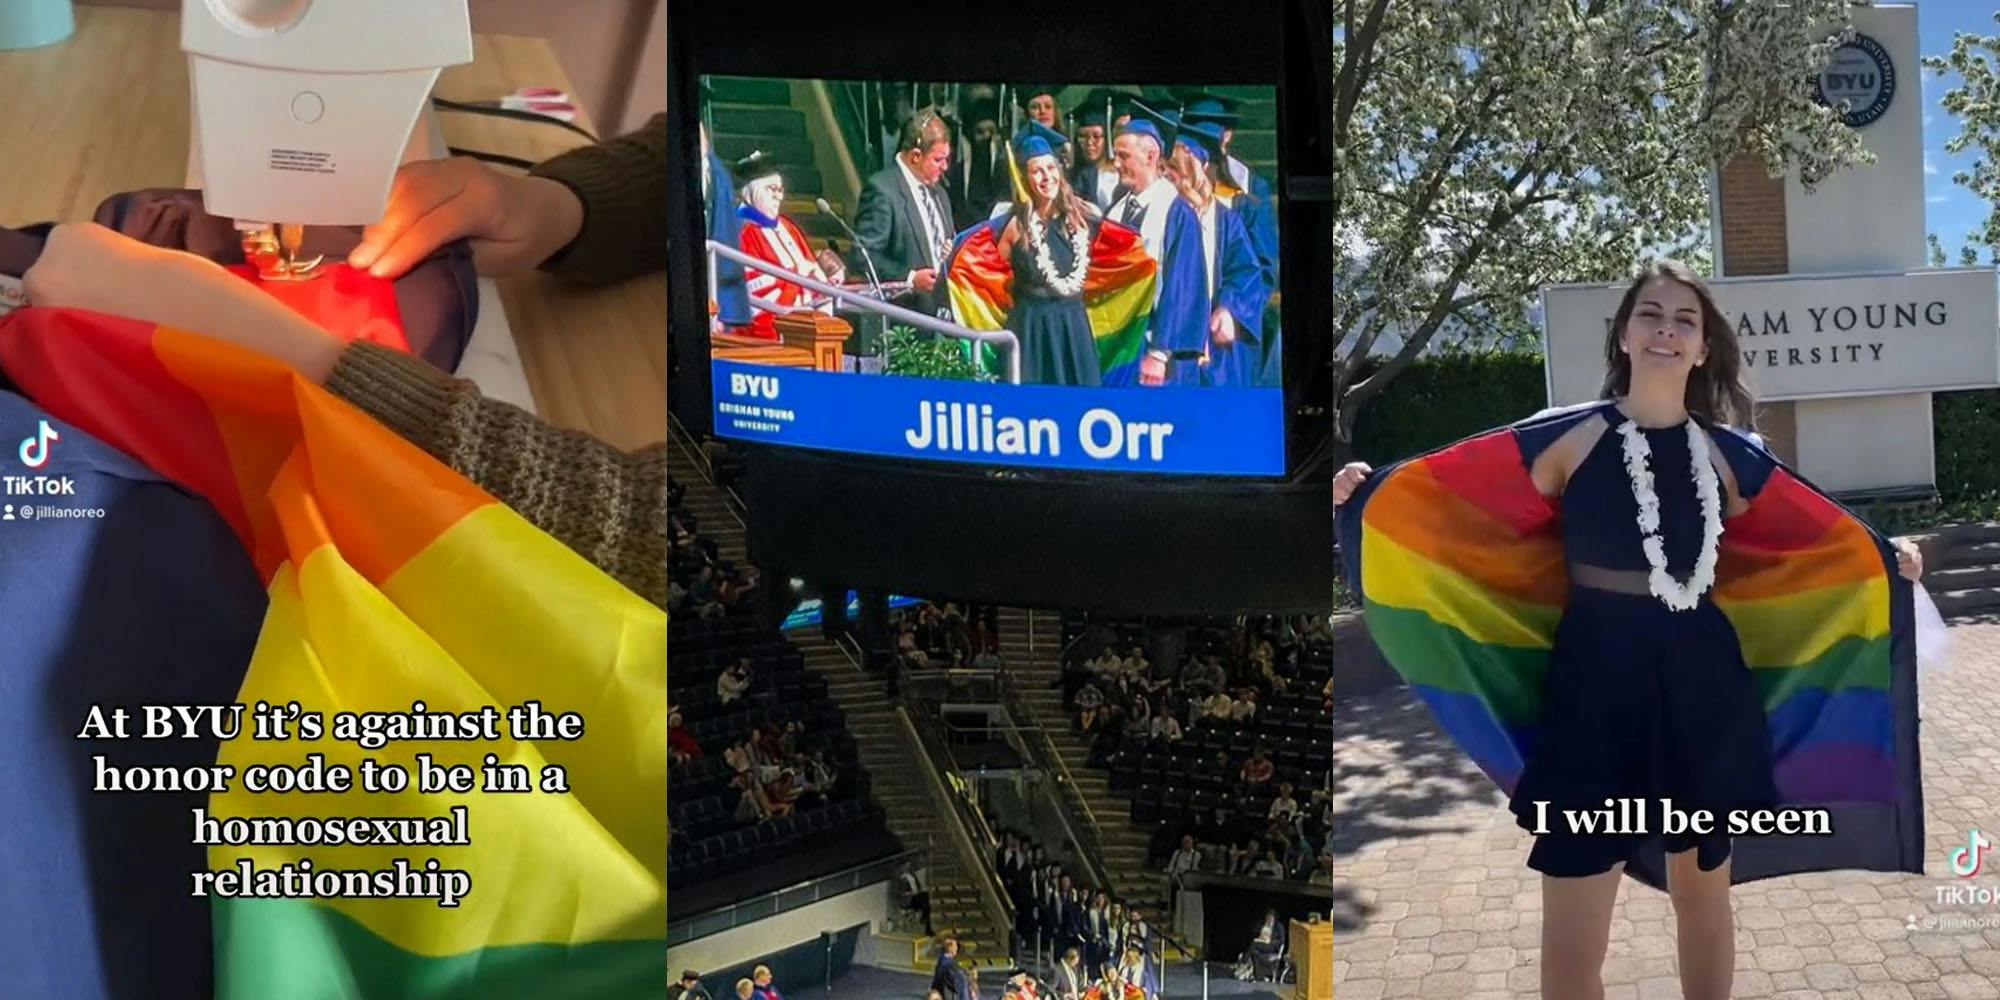 Woman sewing pride flag with sewing machine caption "At BYU its against the honor code to be in a homosexual relationship" (l) Graduation ceremony with jumbo screen showing woman flashing open her graduation gown to reveal pride flag (c) Woman holding open gown to show flag interior caption "I will be seen" (r)